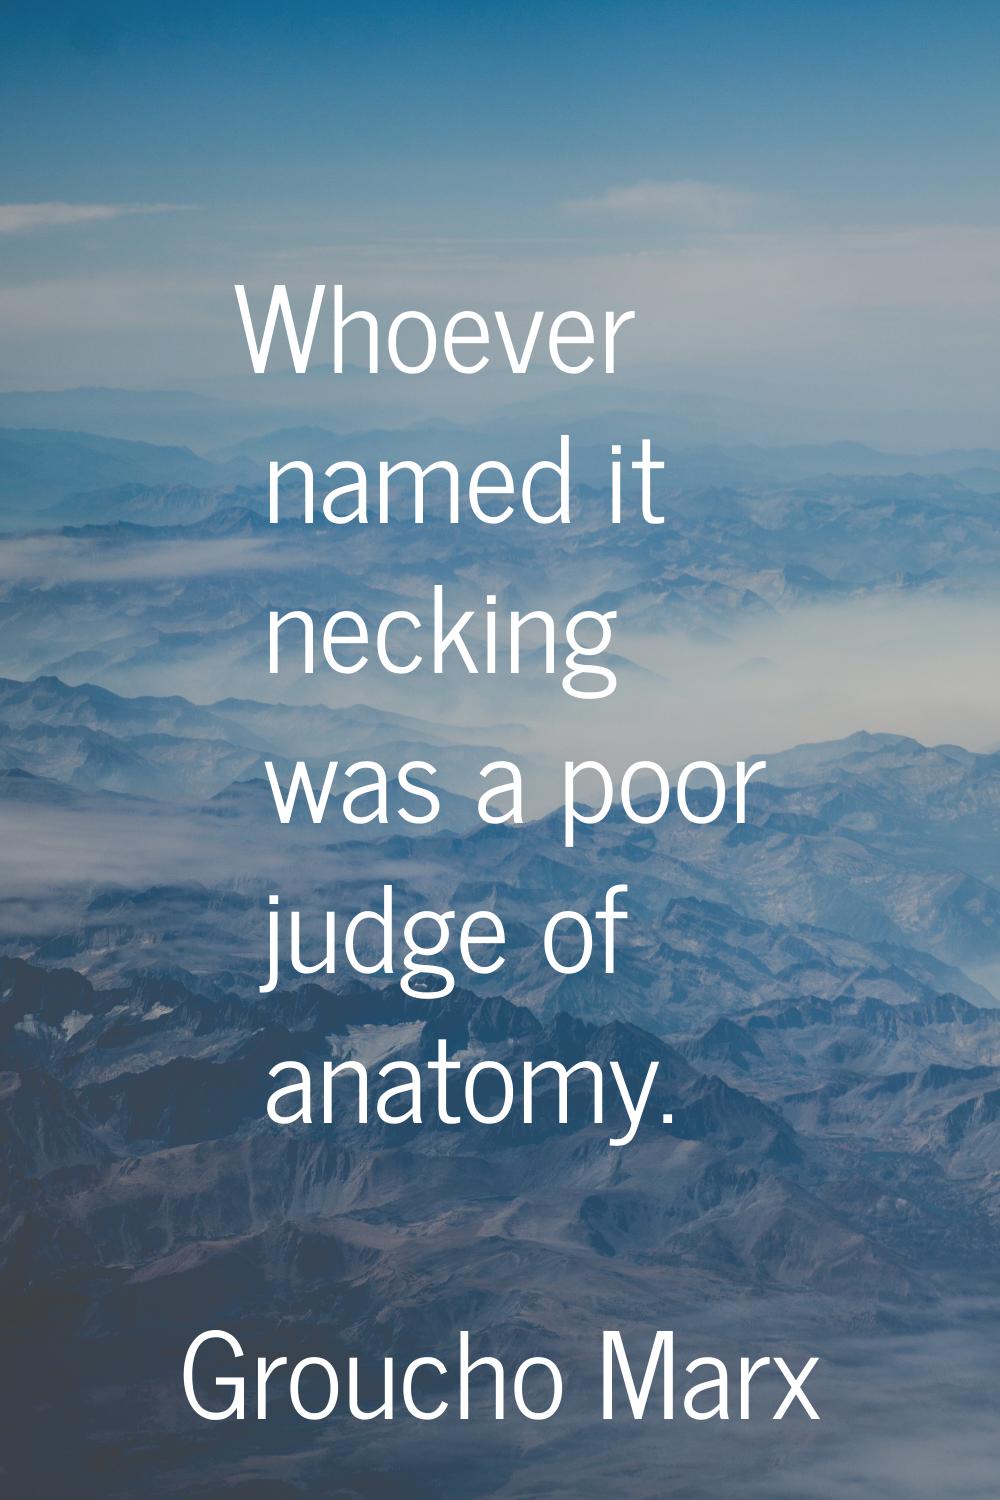 Whoever named it necking was a poor judge of anatomy.